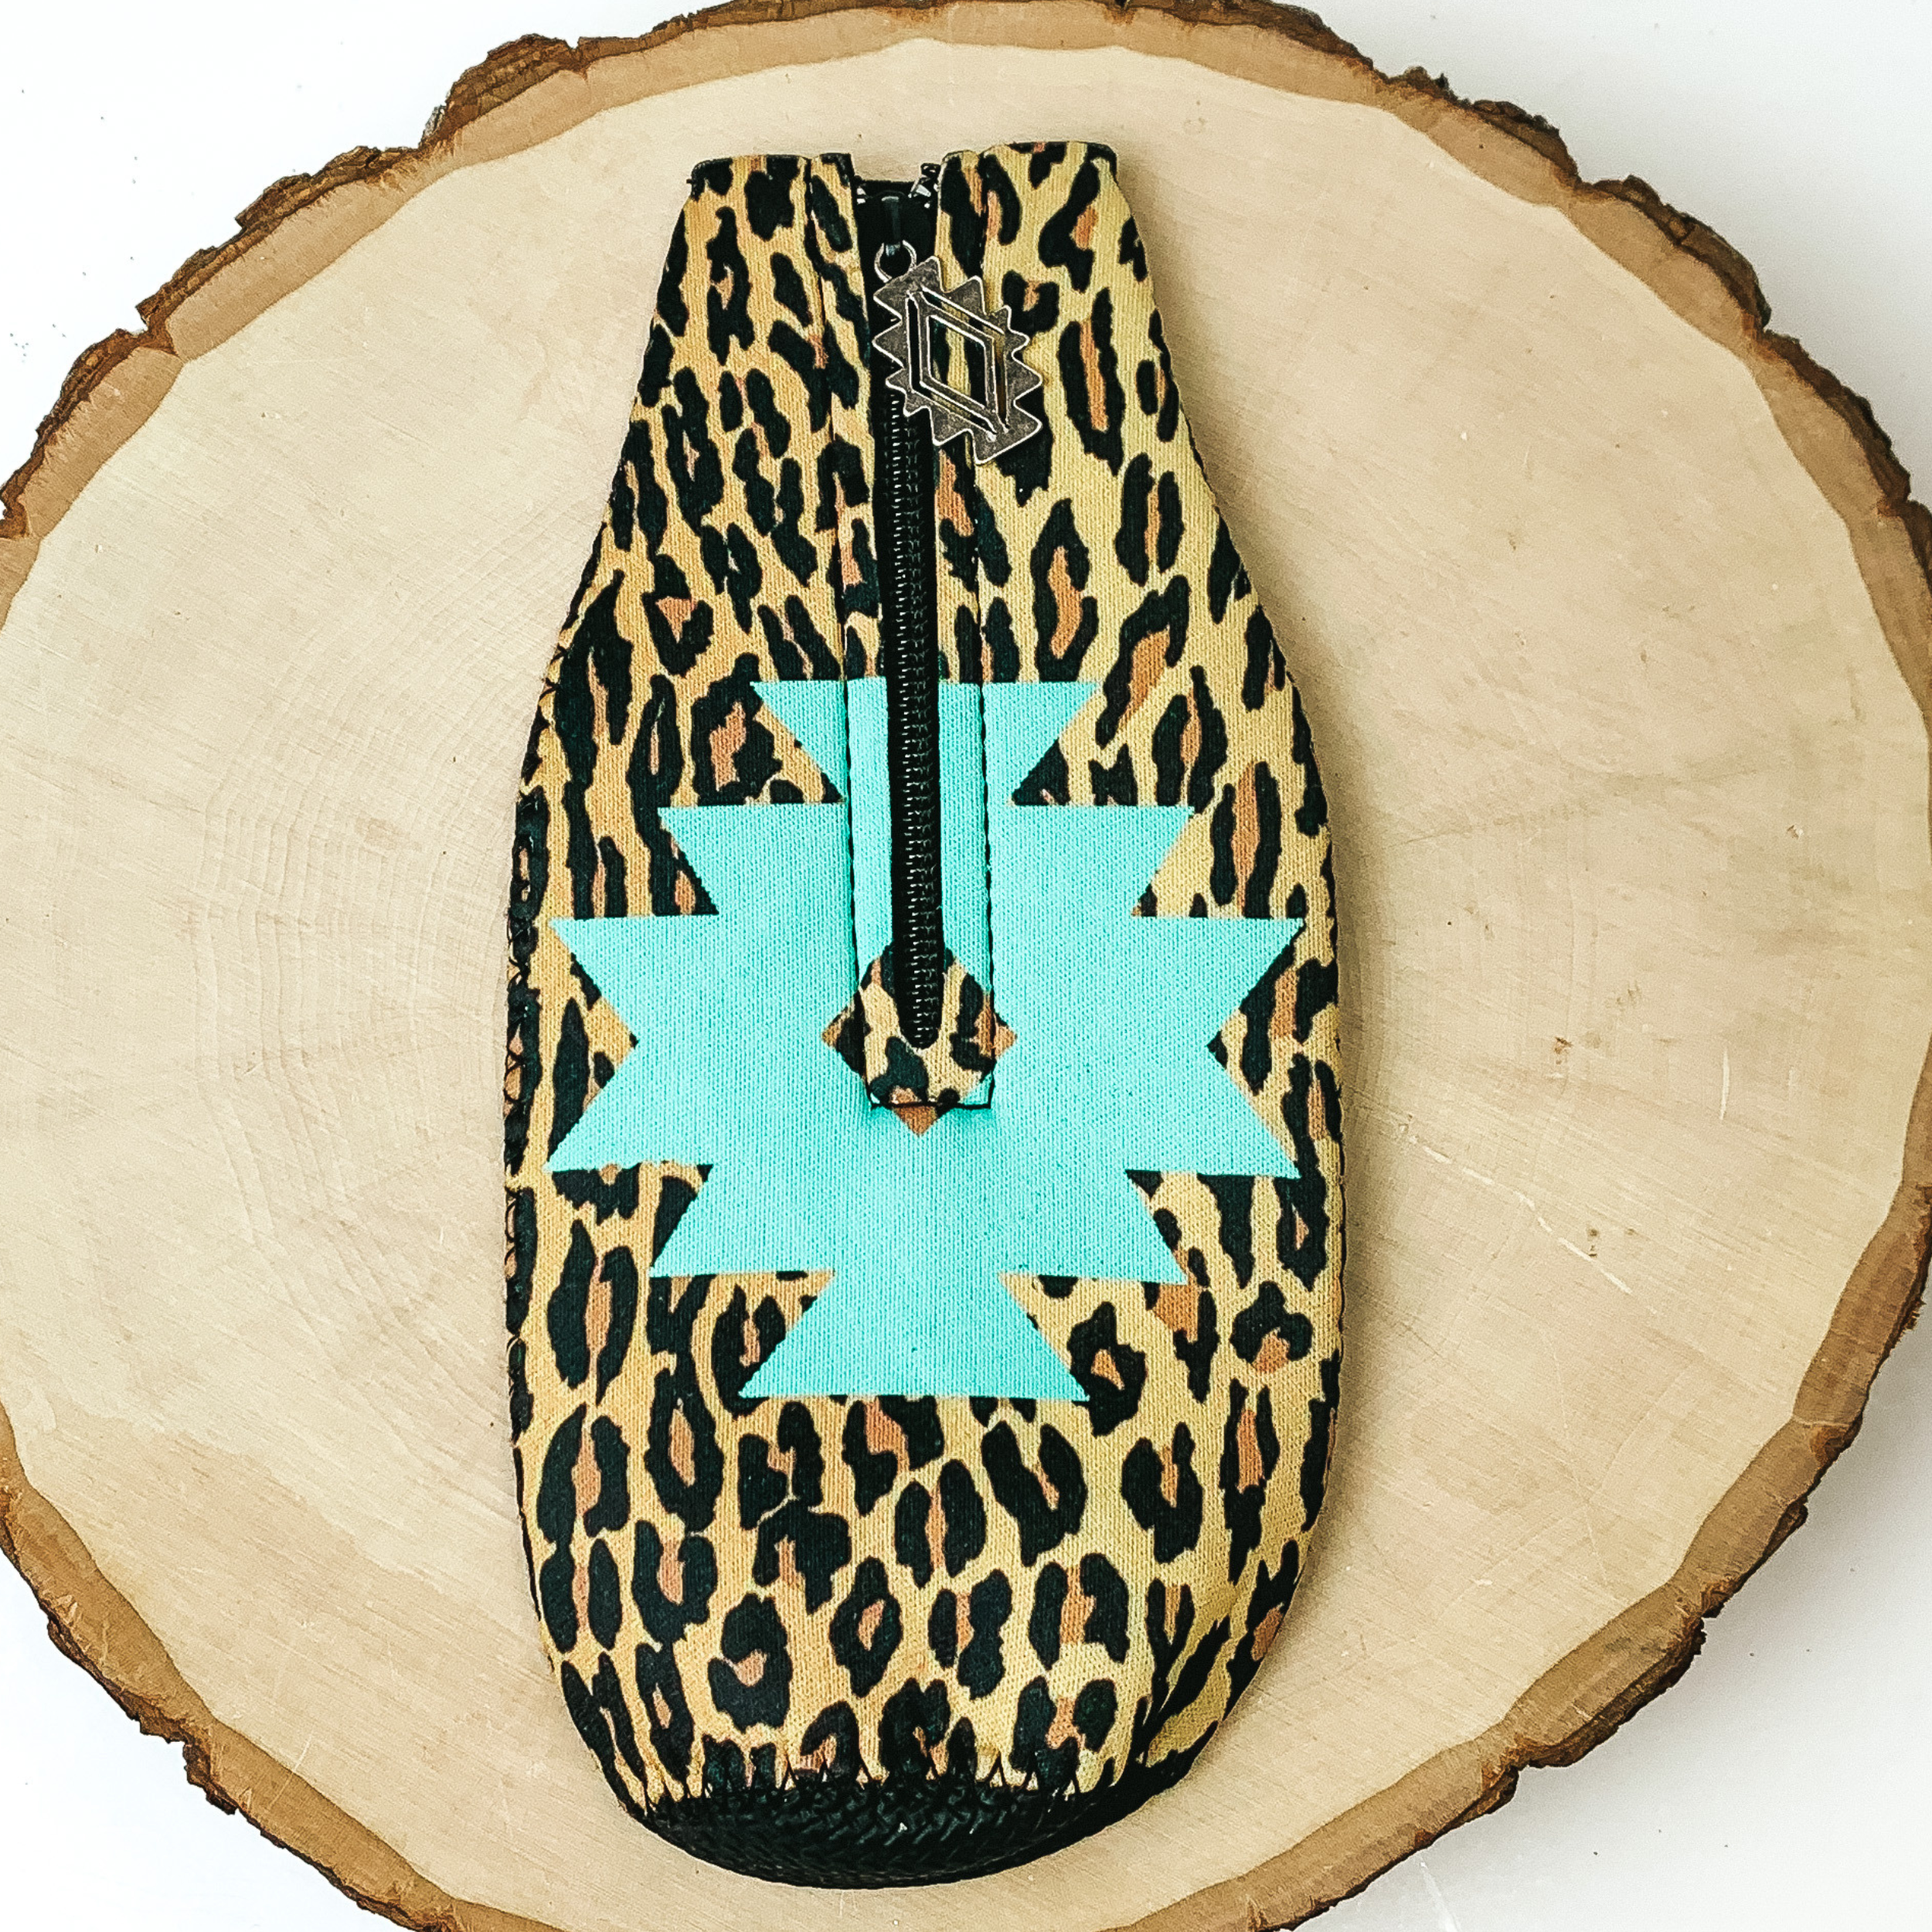 This Navajo and Leopard Print Zip Up koozie With Navajo Charm is pictured on a peice of wood, with a white background.  